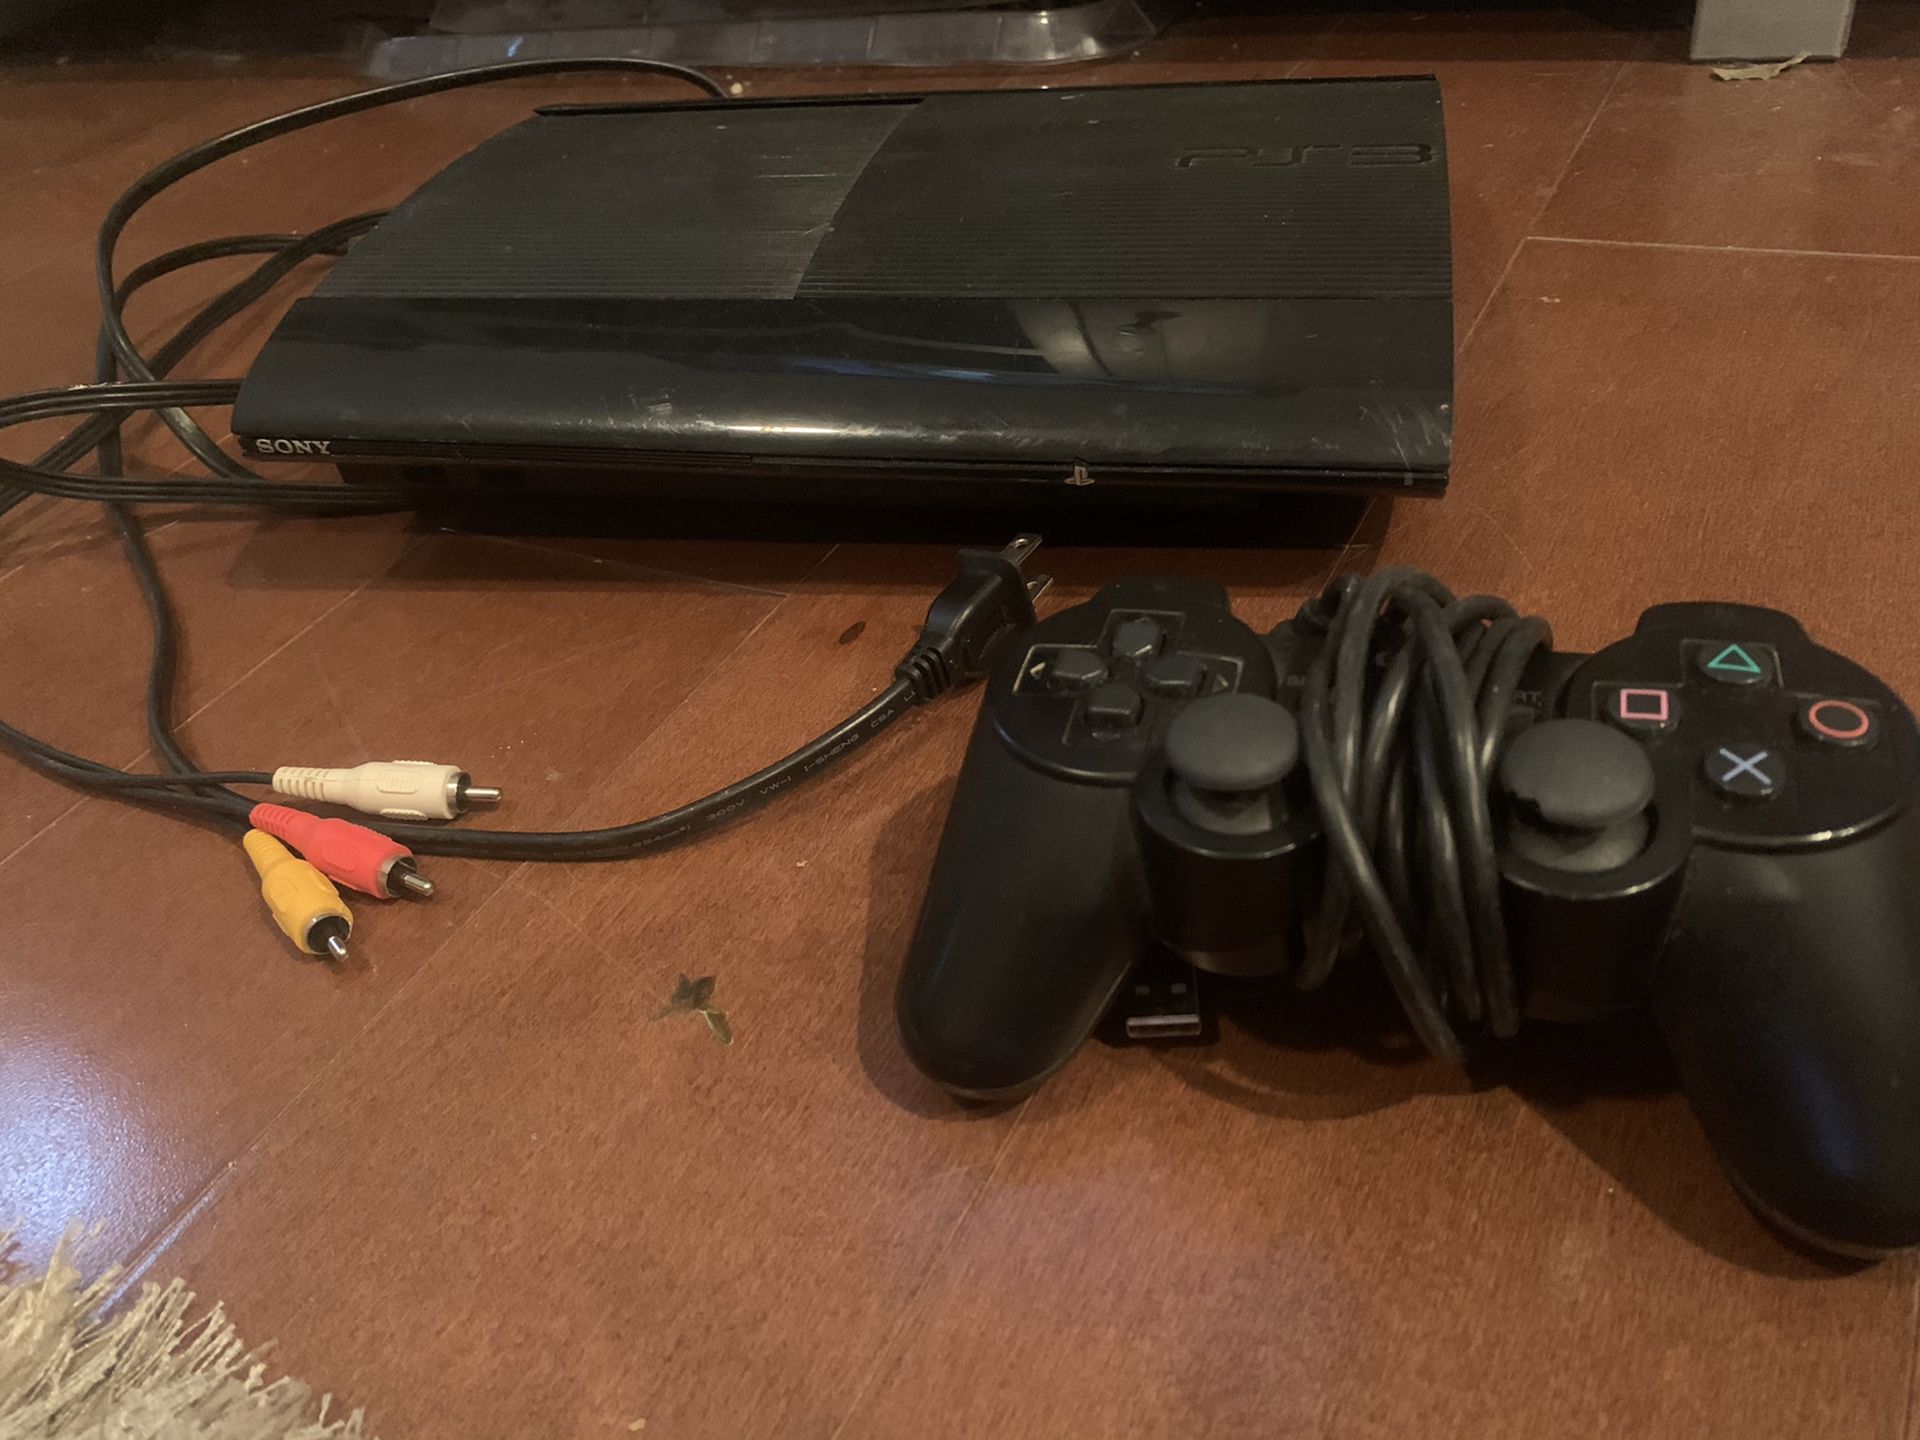 Ps3 - 465gb and controller